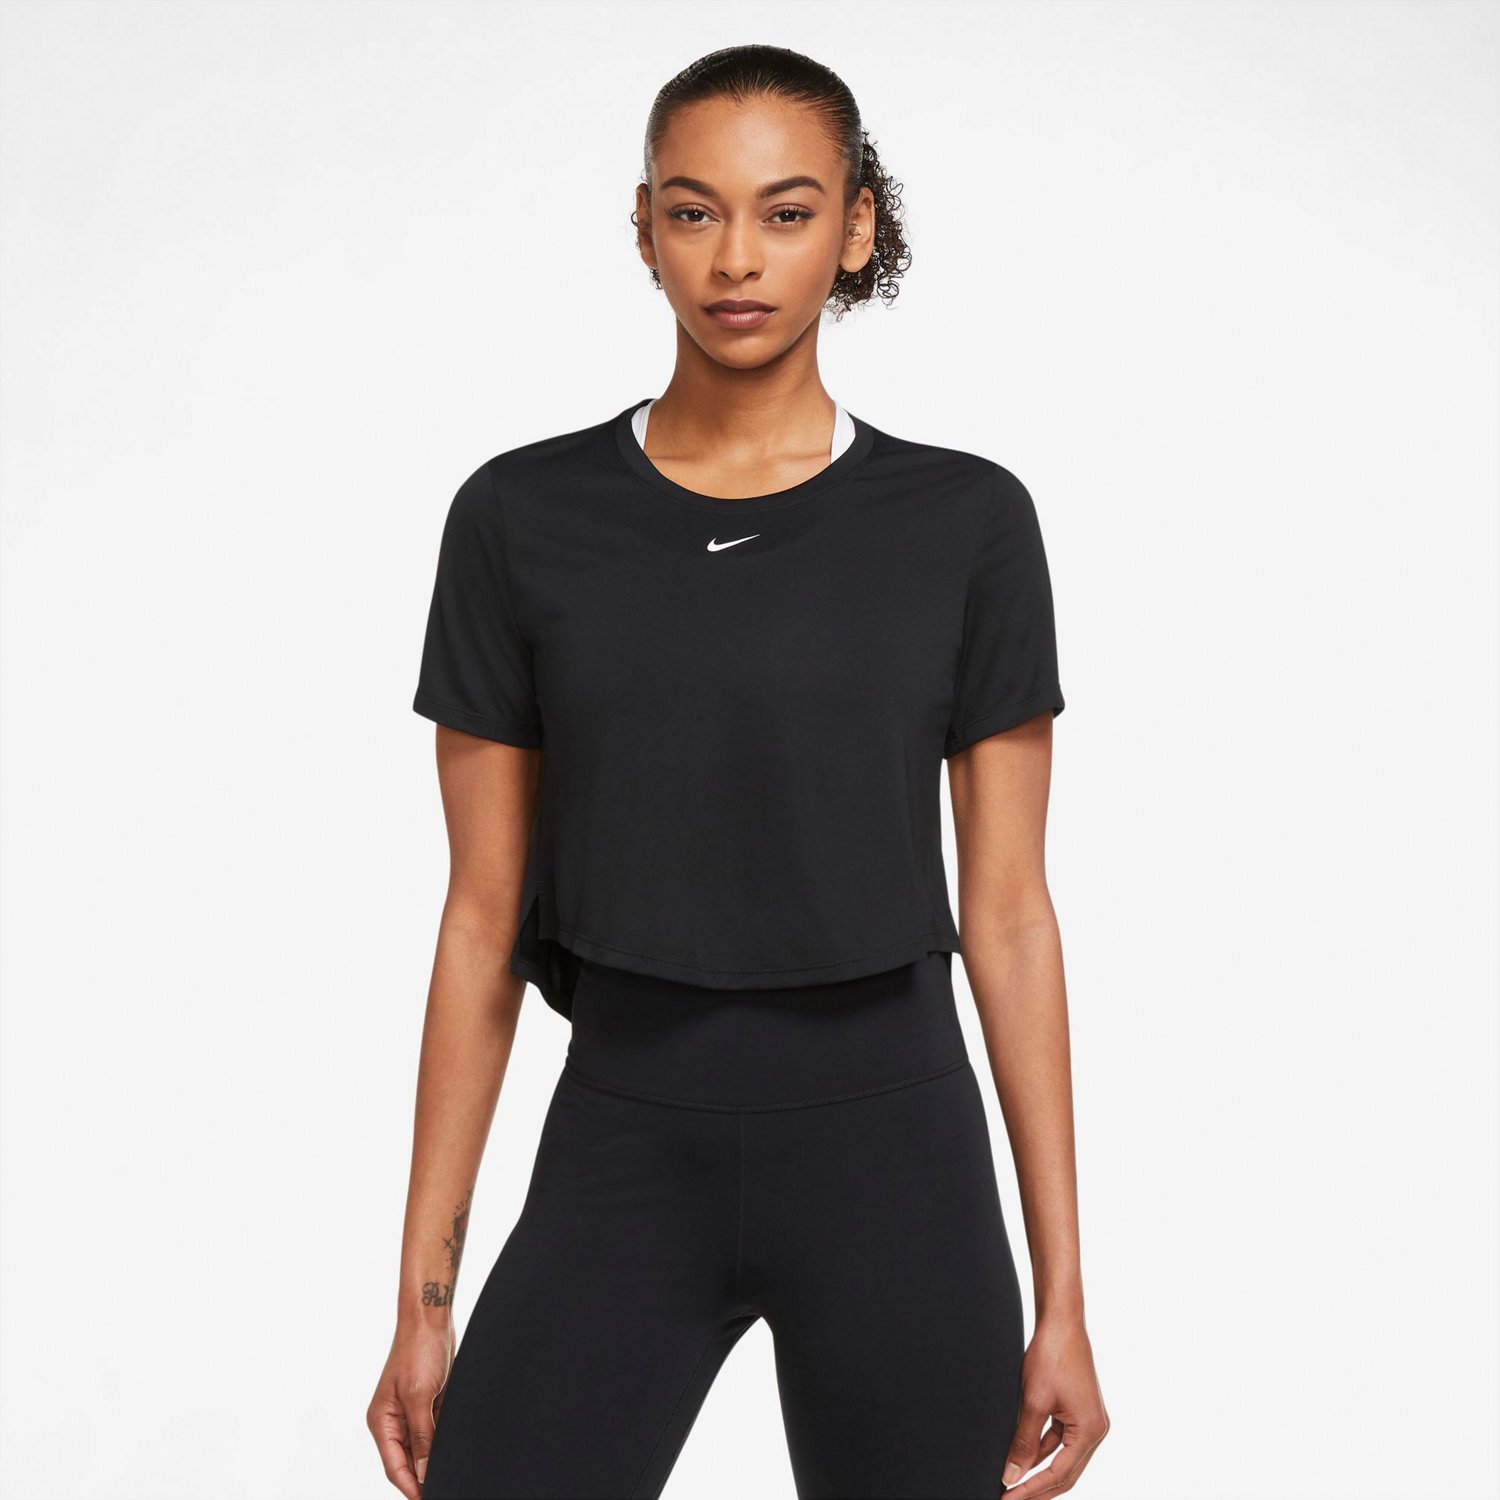 investering Apt campus Nike Women's Dri-FIT One Standard Fit Short Sleeve Crop Top | Academy